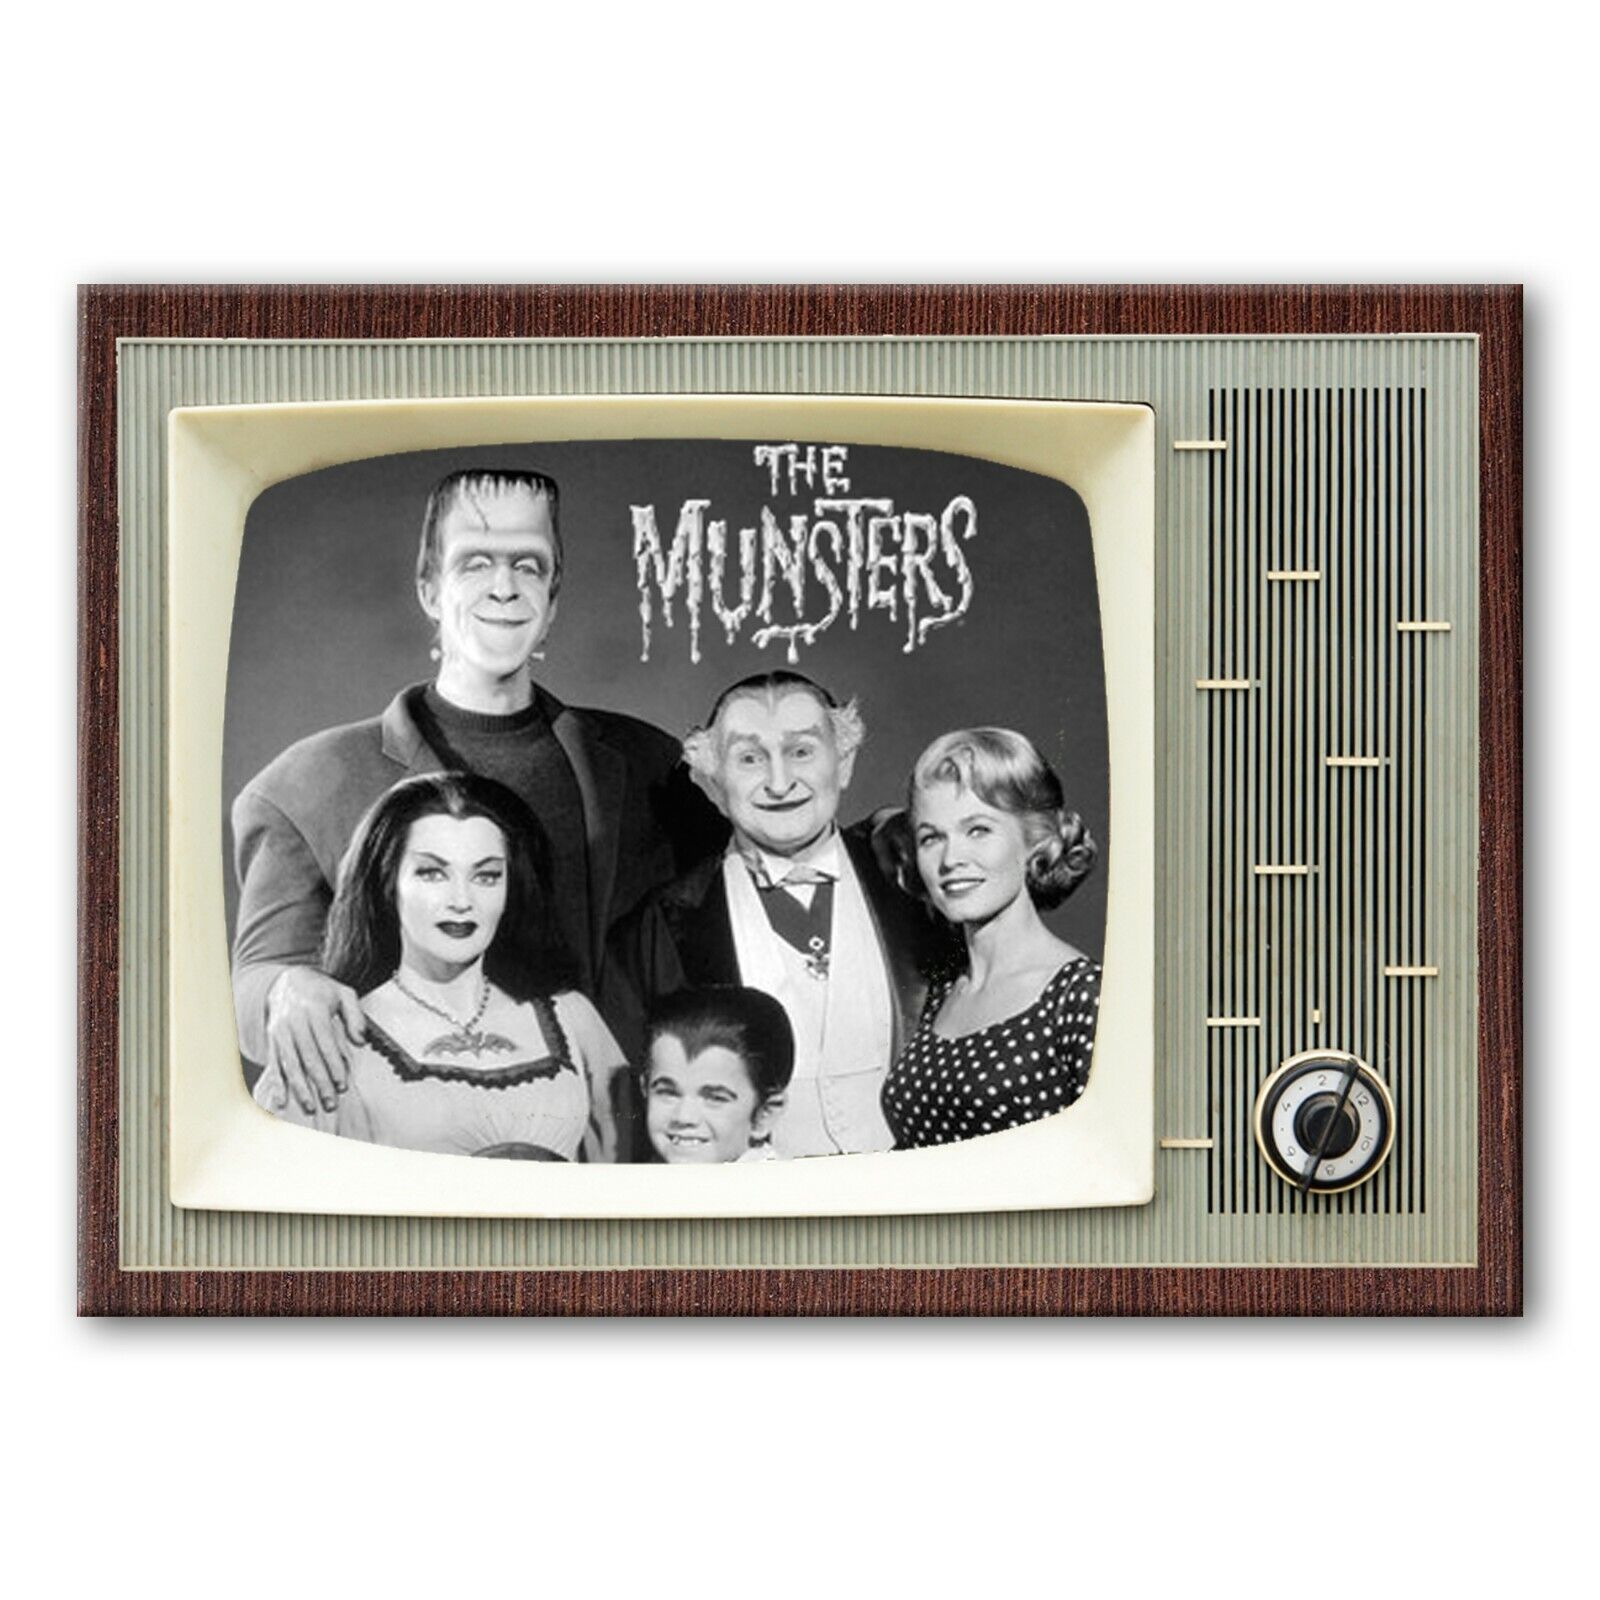 THE MUNSTERS Classic TV 3.5 inches x 2.5 inches Steel FRIDGE MAGNET